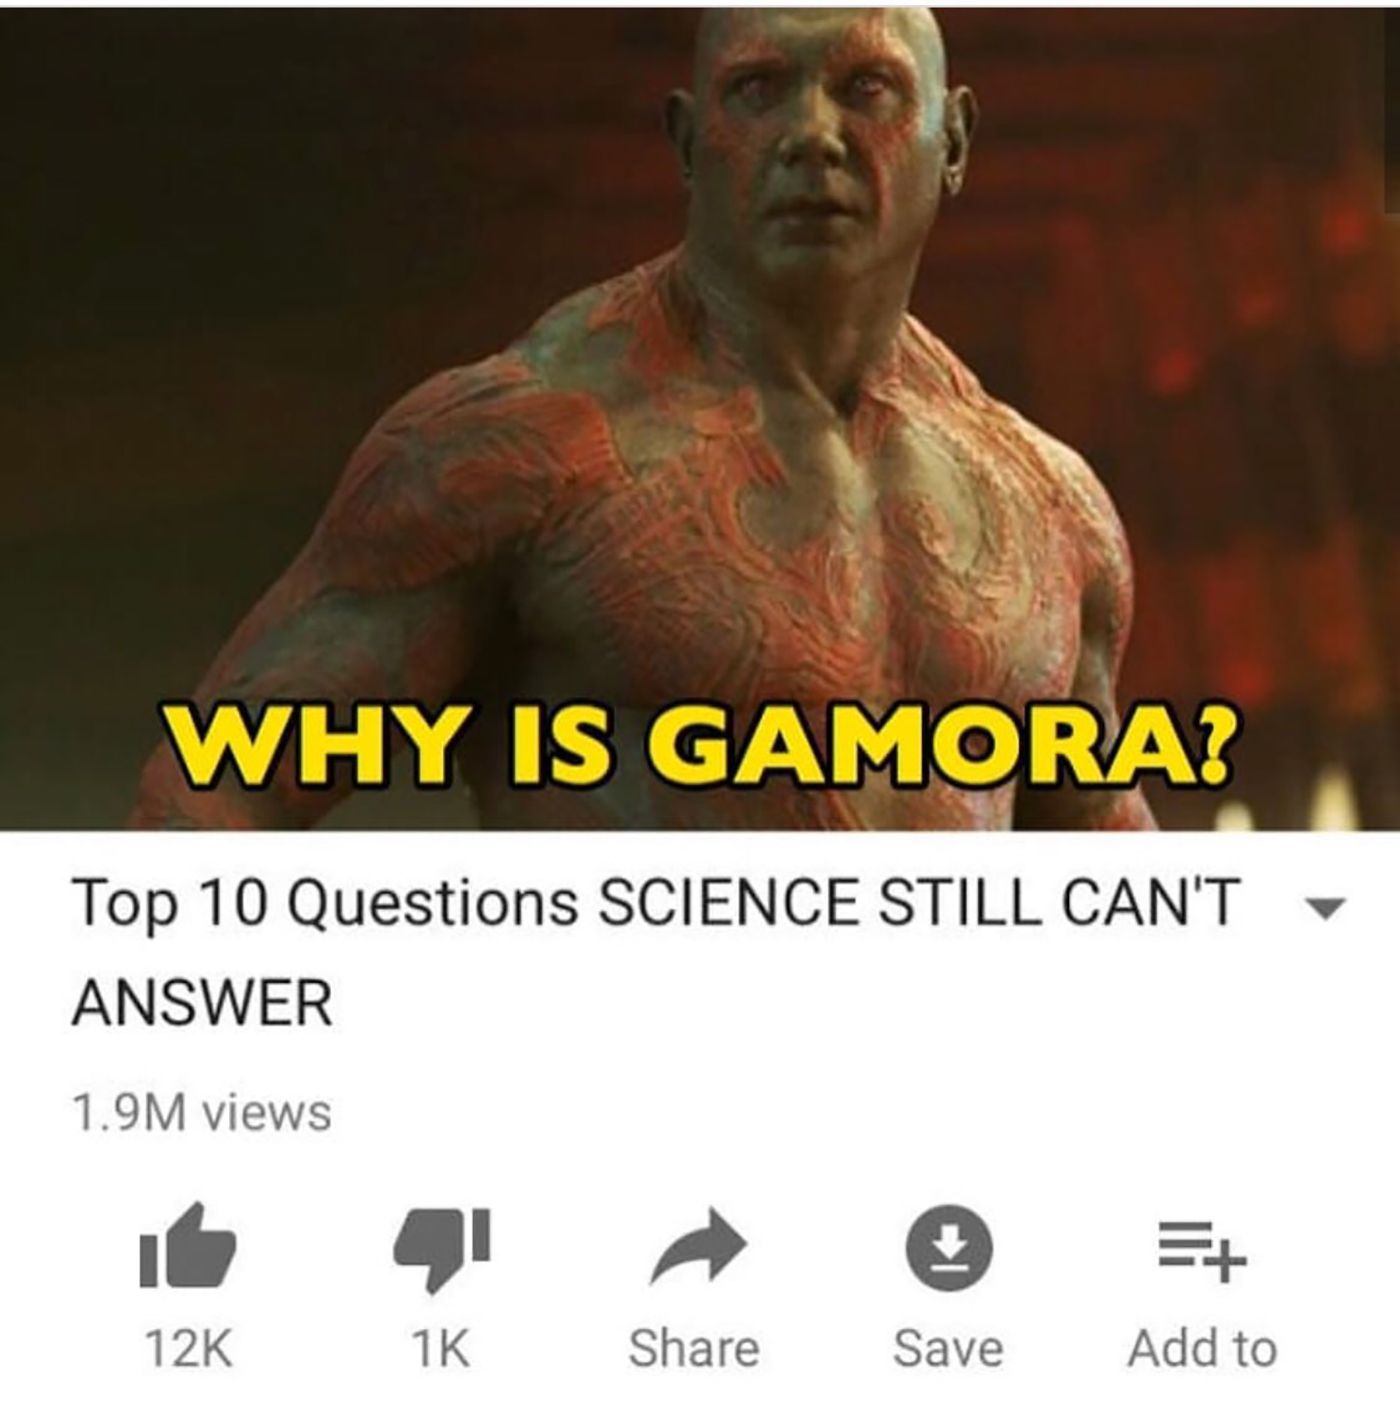 Drax Questions Science Can't Answer